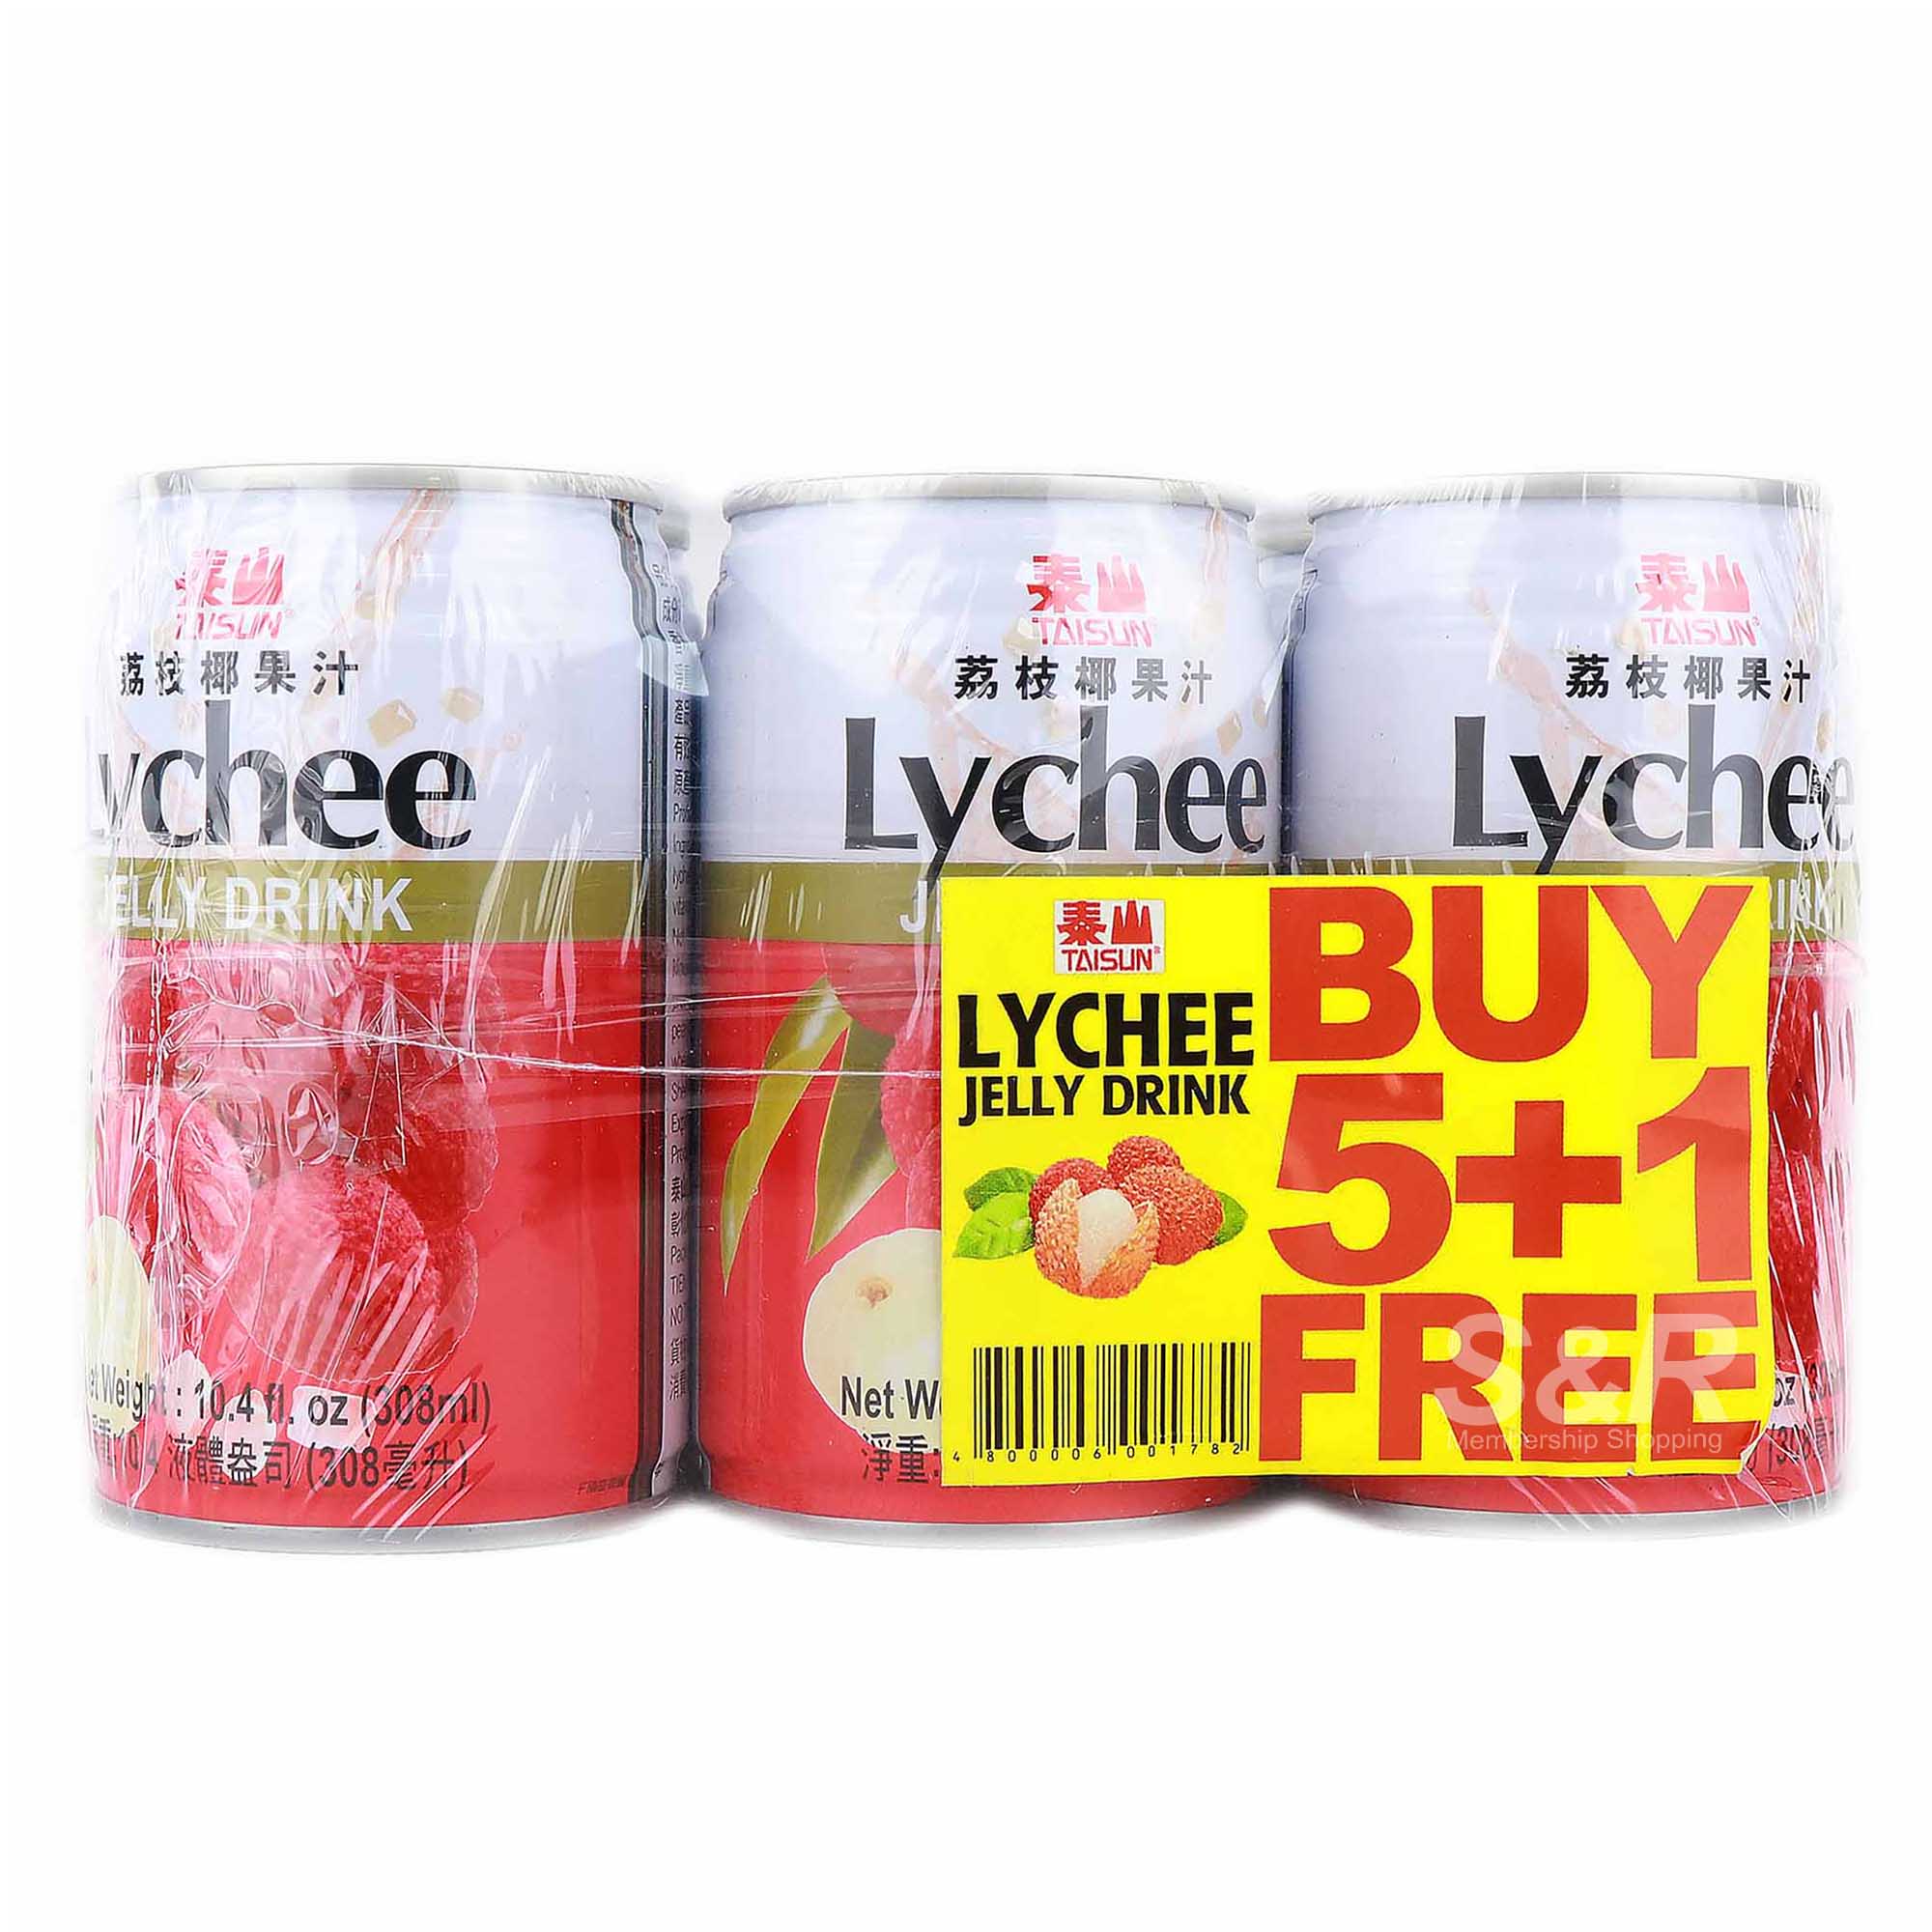 Taisun Lychee Jelly Drink 6 cans